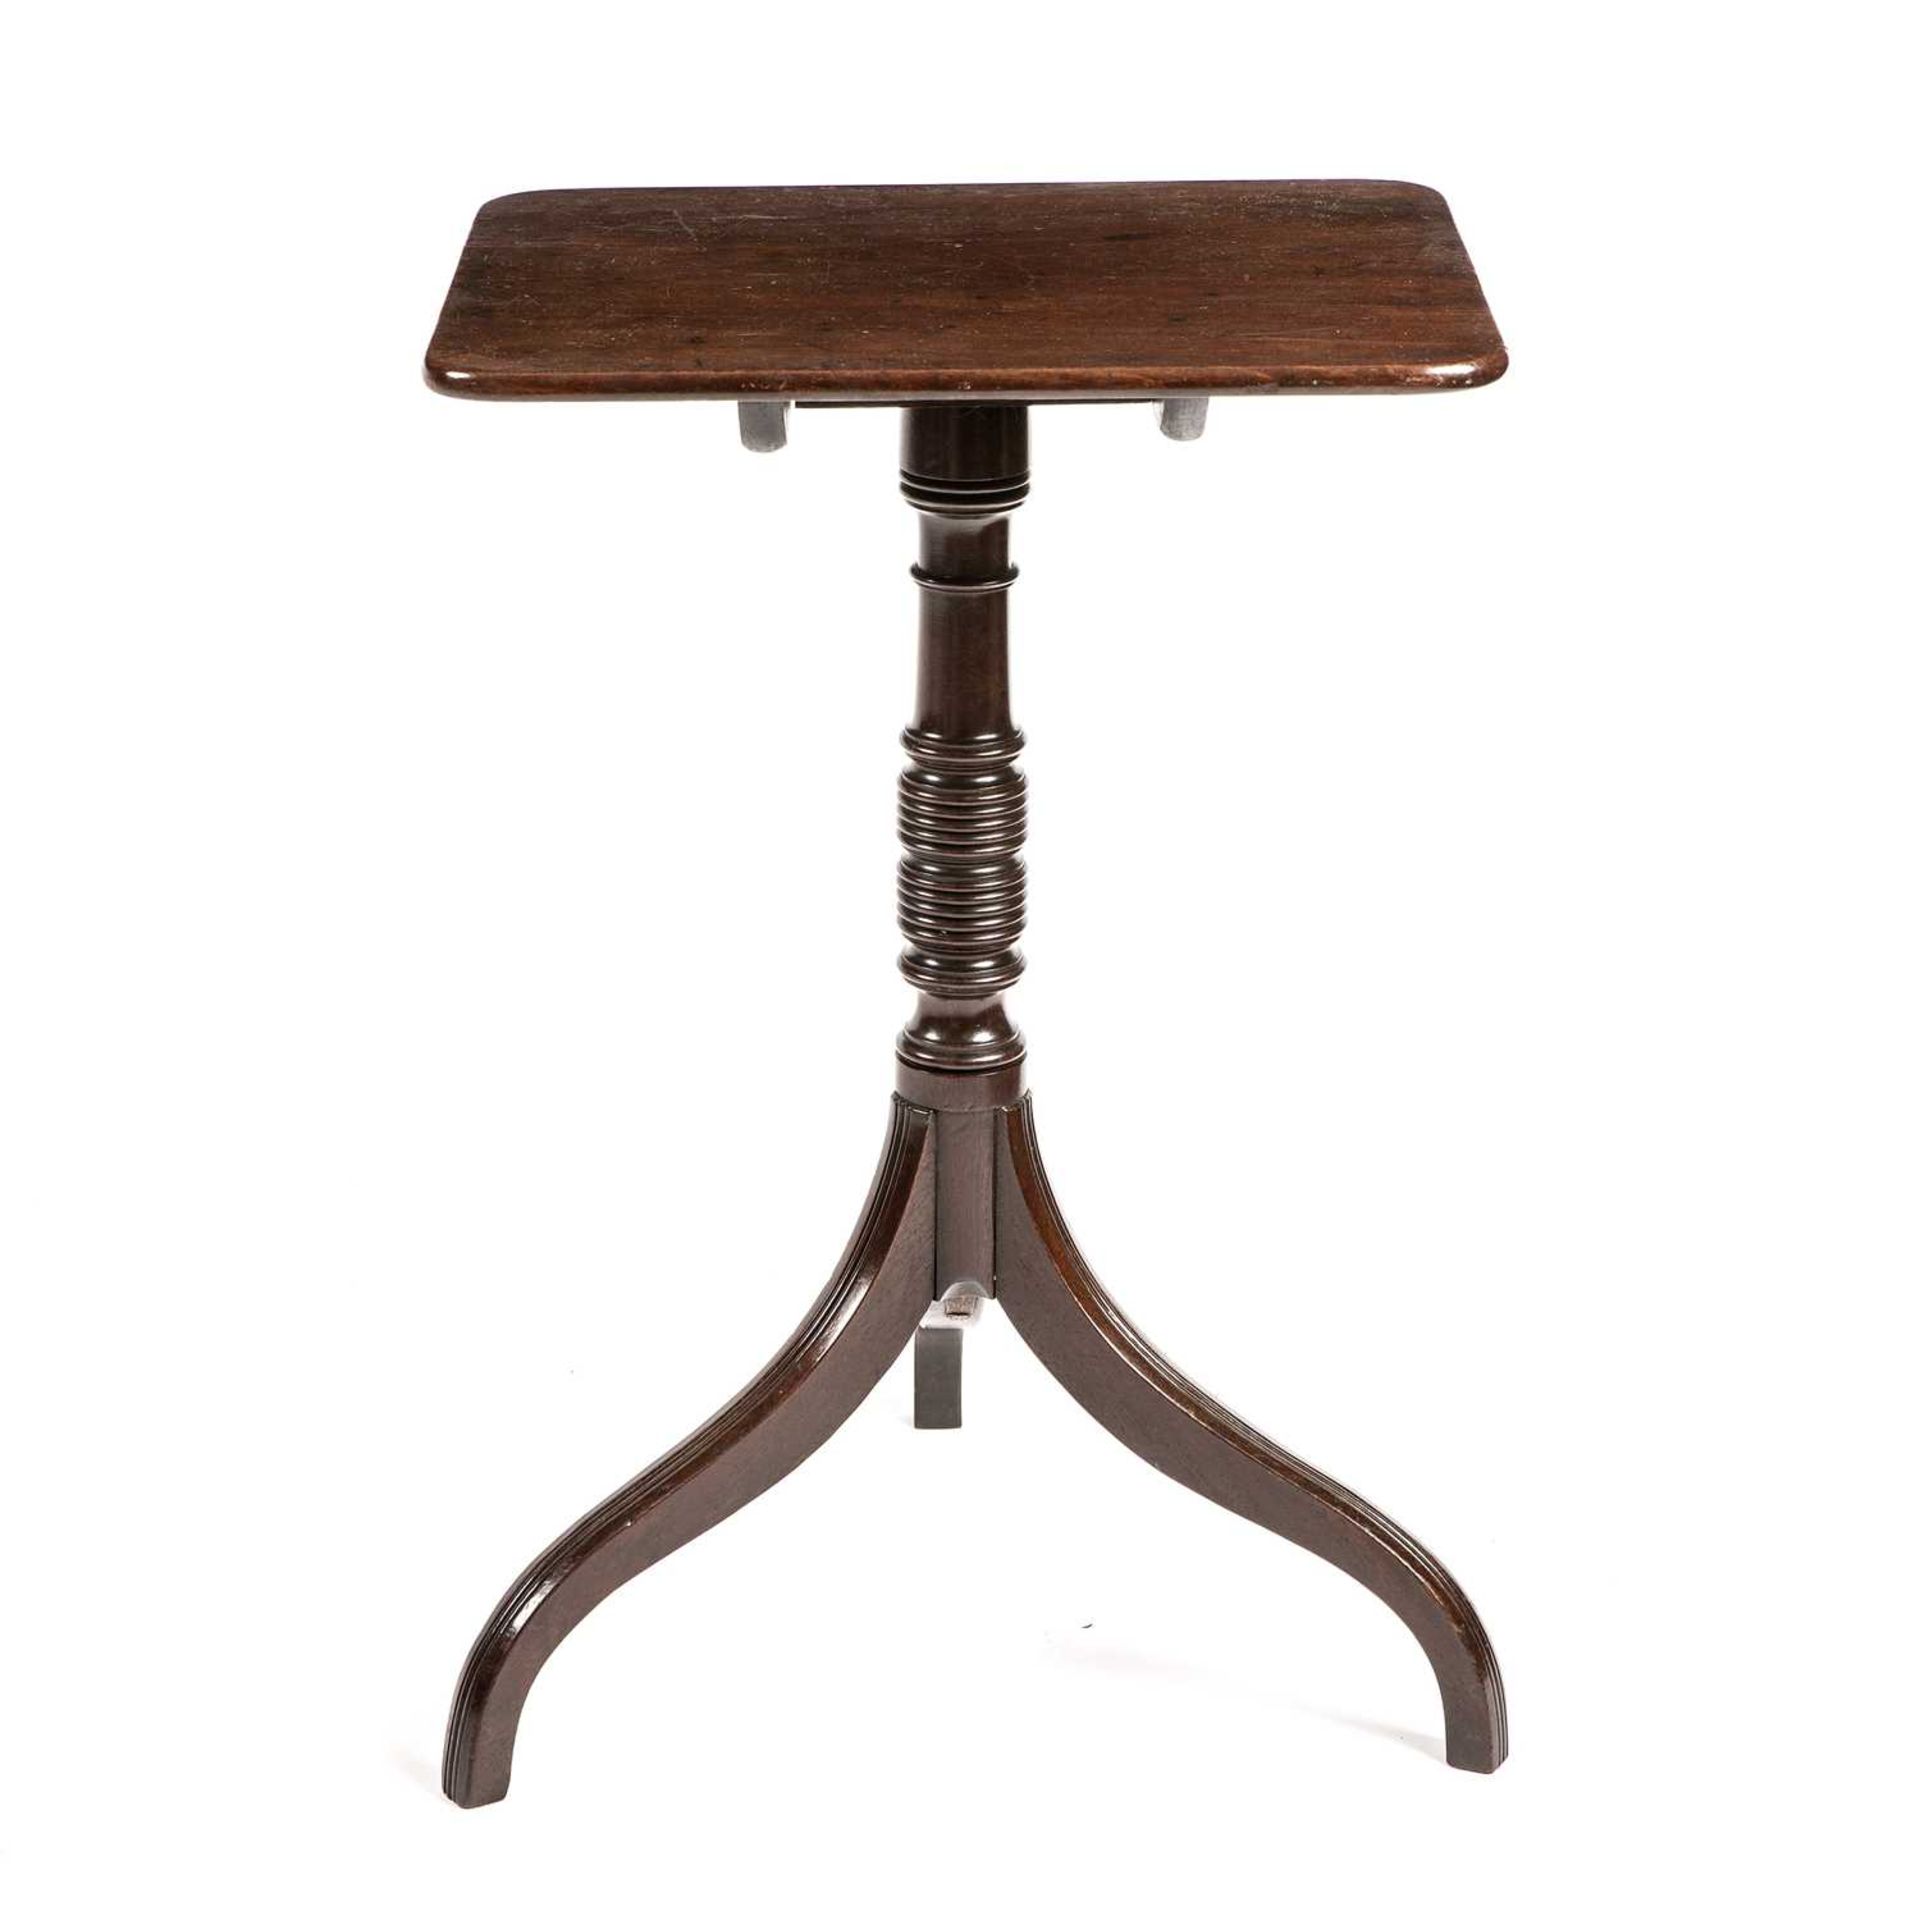 A Regency mahogany tilt top wine table with a turned stem and tripod base. 49cm wide 44cm deep - Image 3 of 3